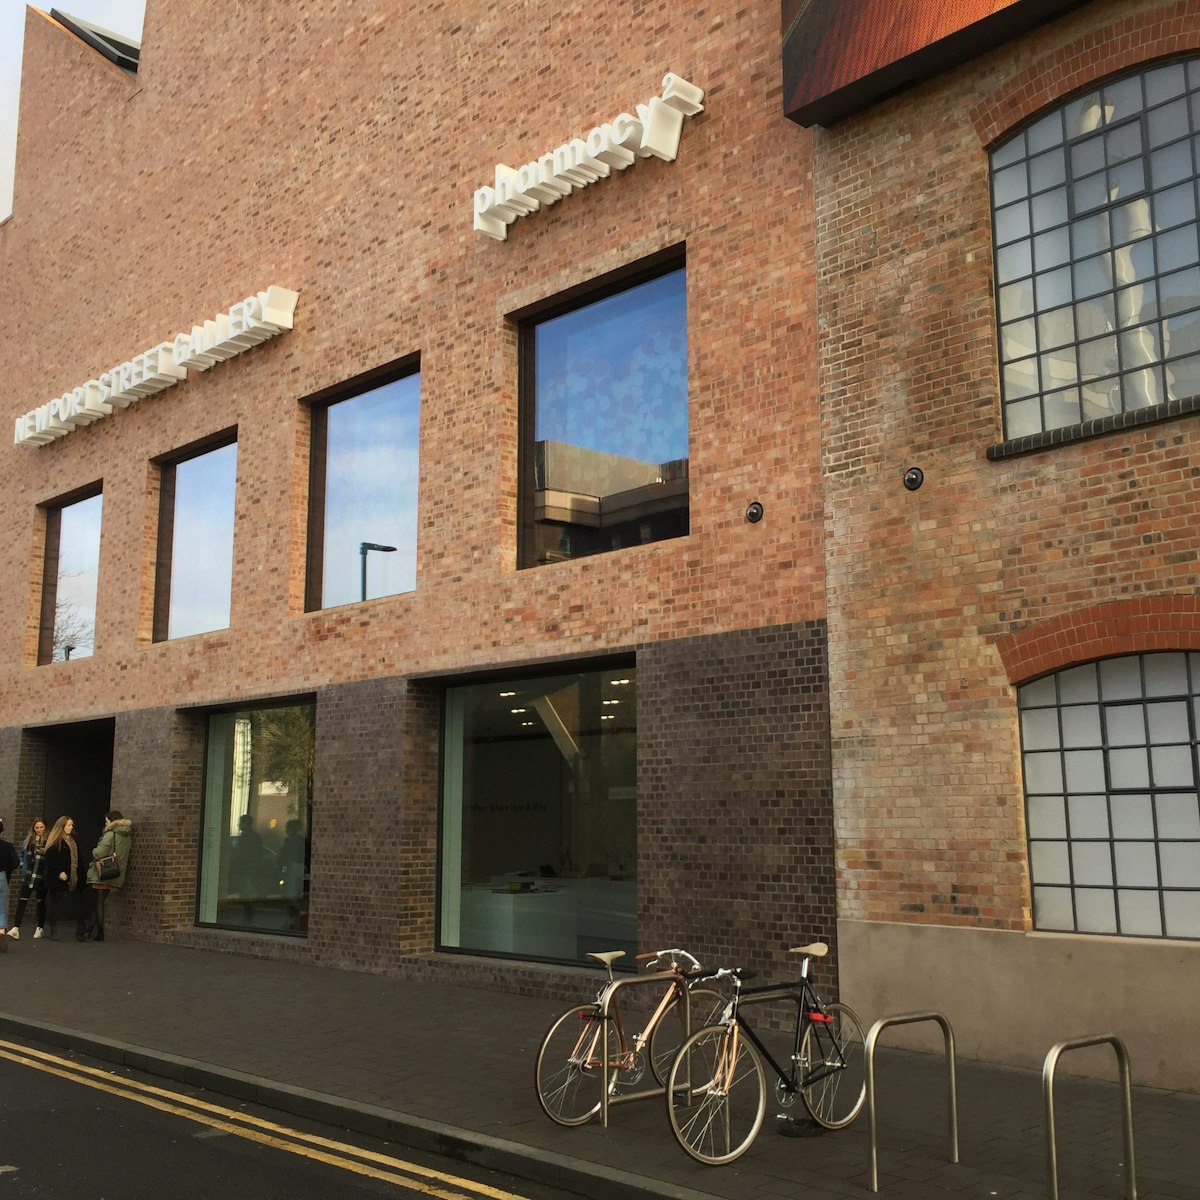 The exterior of Damien Hirst's Newport Street Gallery, in which the restaurant Pharmacy 2 is located